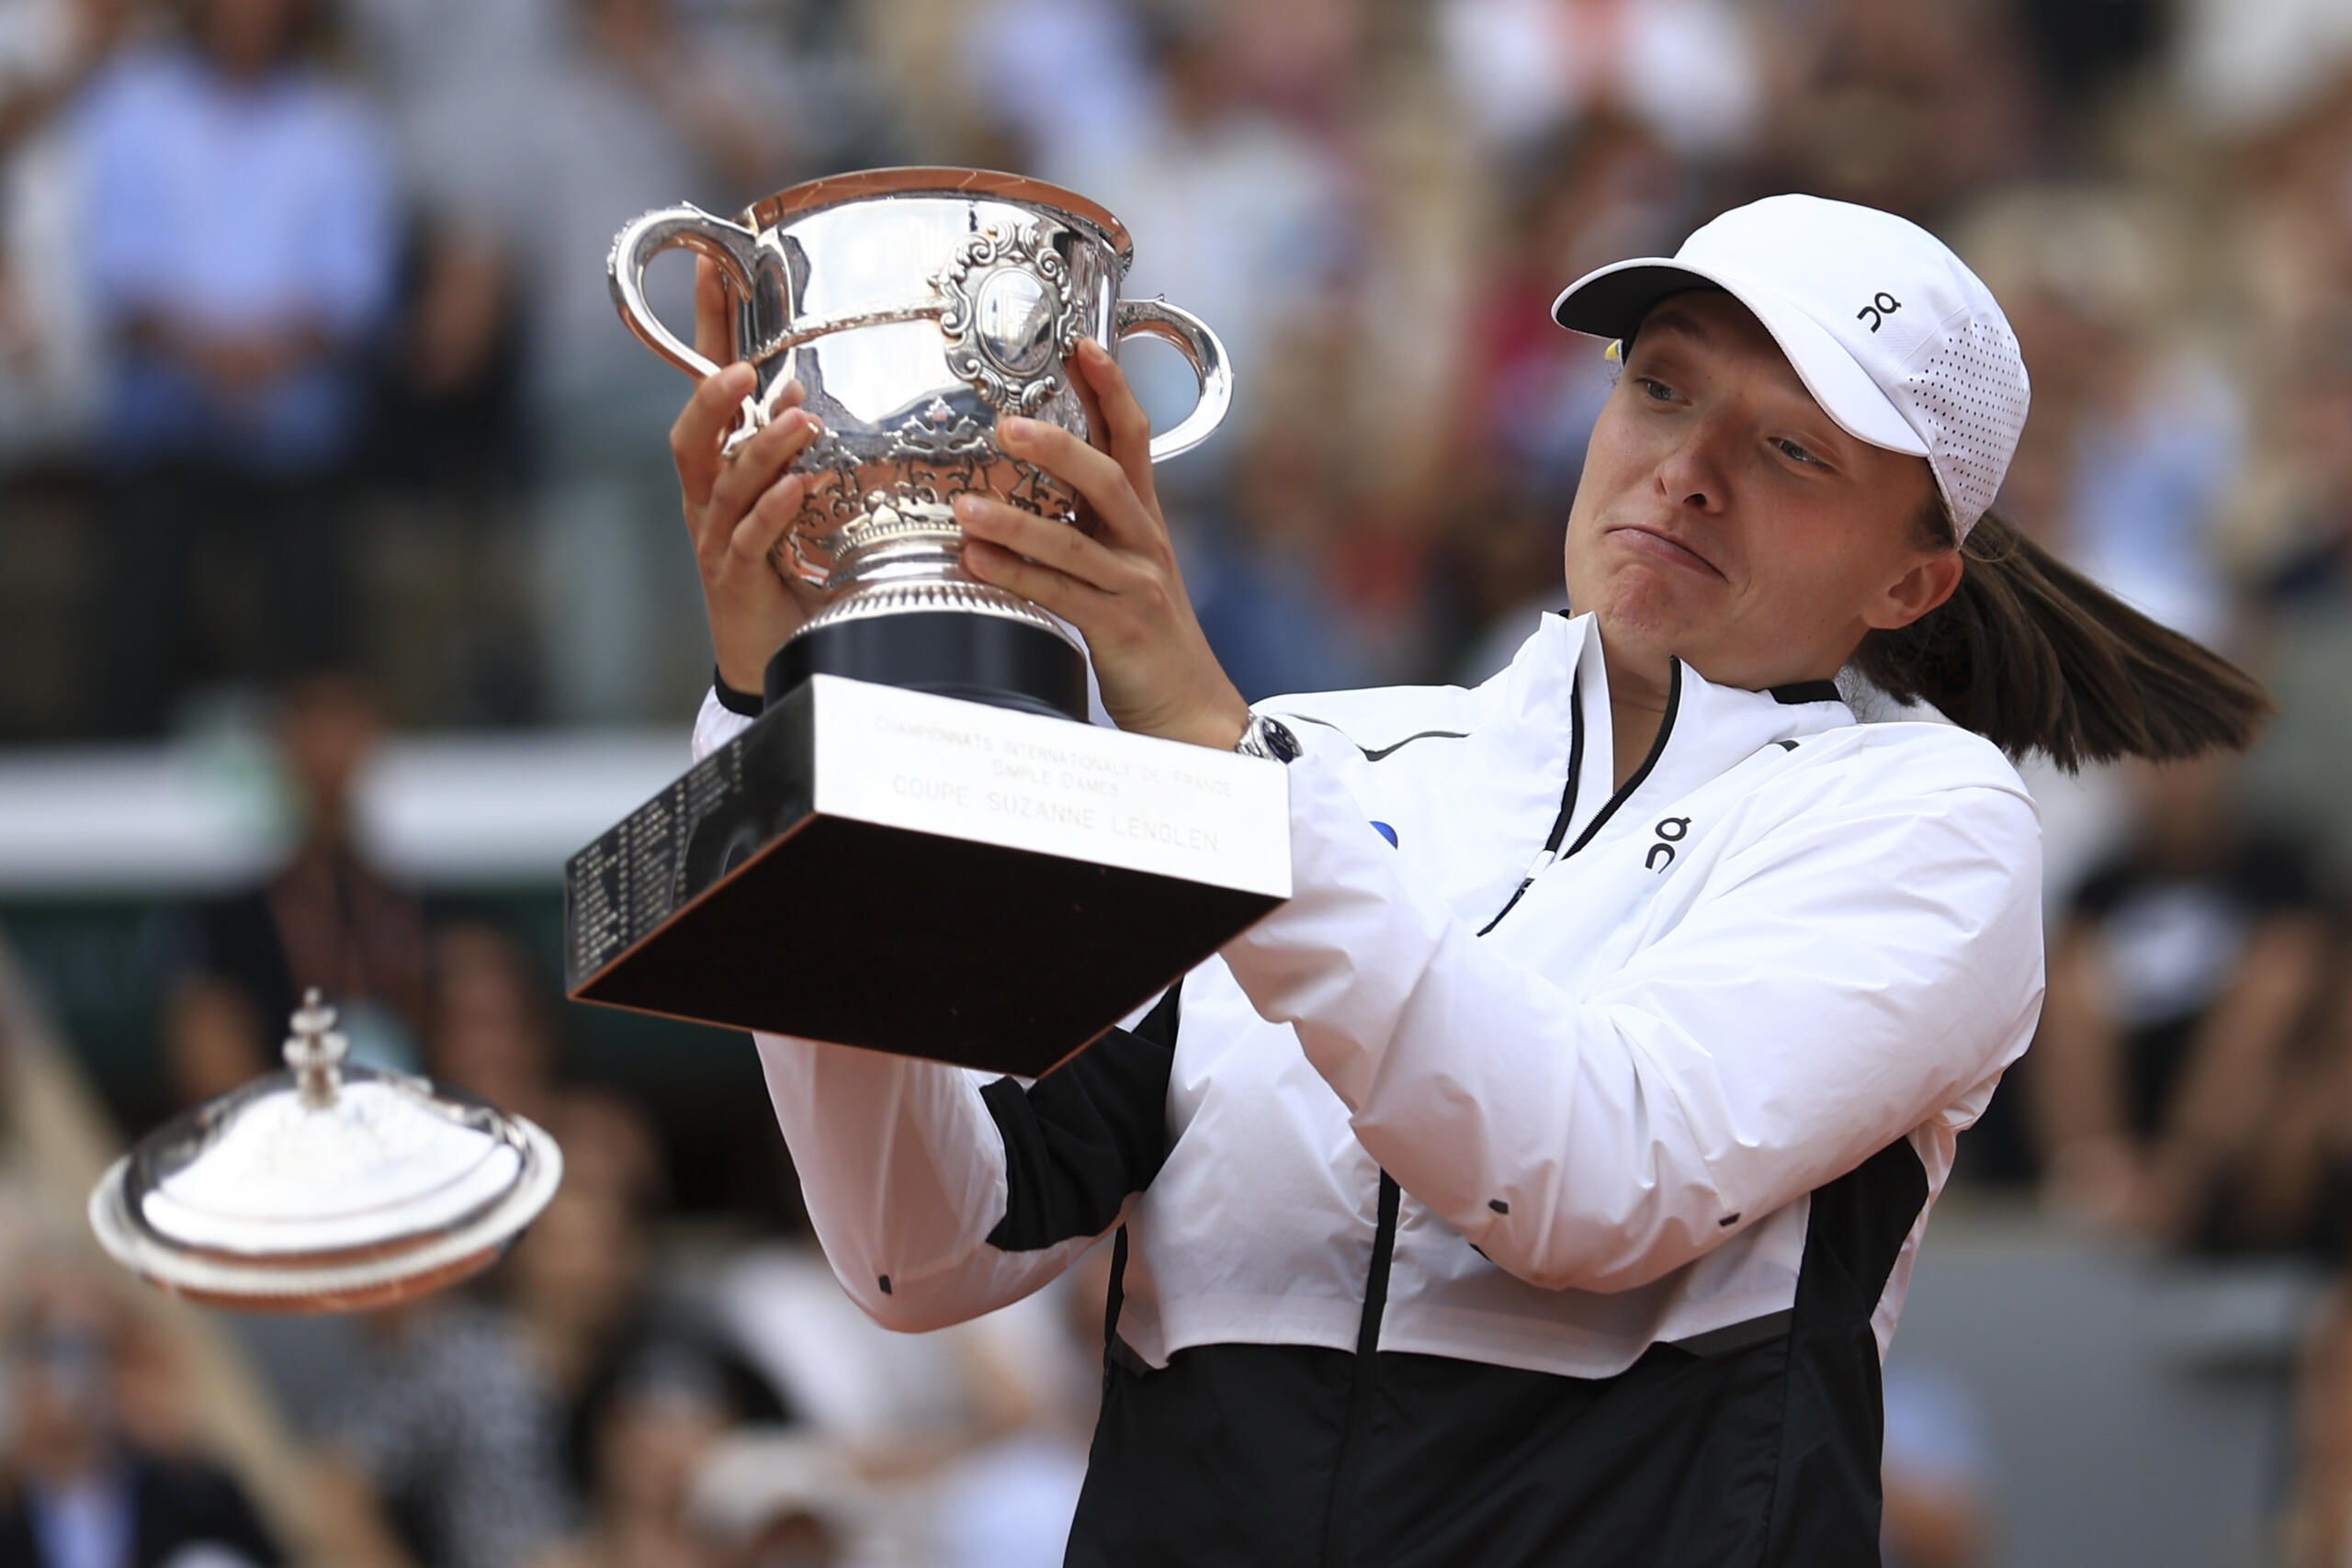 The lid flies off the trophy as Poland's Iga Swiatek celebrates winning the women's final match of the French Open tennis tournament against Karolina Muchova of the Czech Republic in three sets, 6-2, 5-7, 6-4, at the Roland Garros stadium in Paris, Saturday, June 10, 2023.